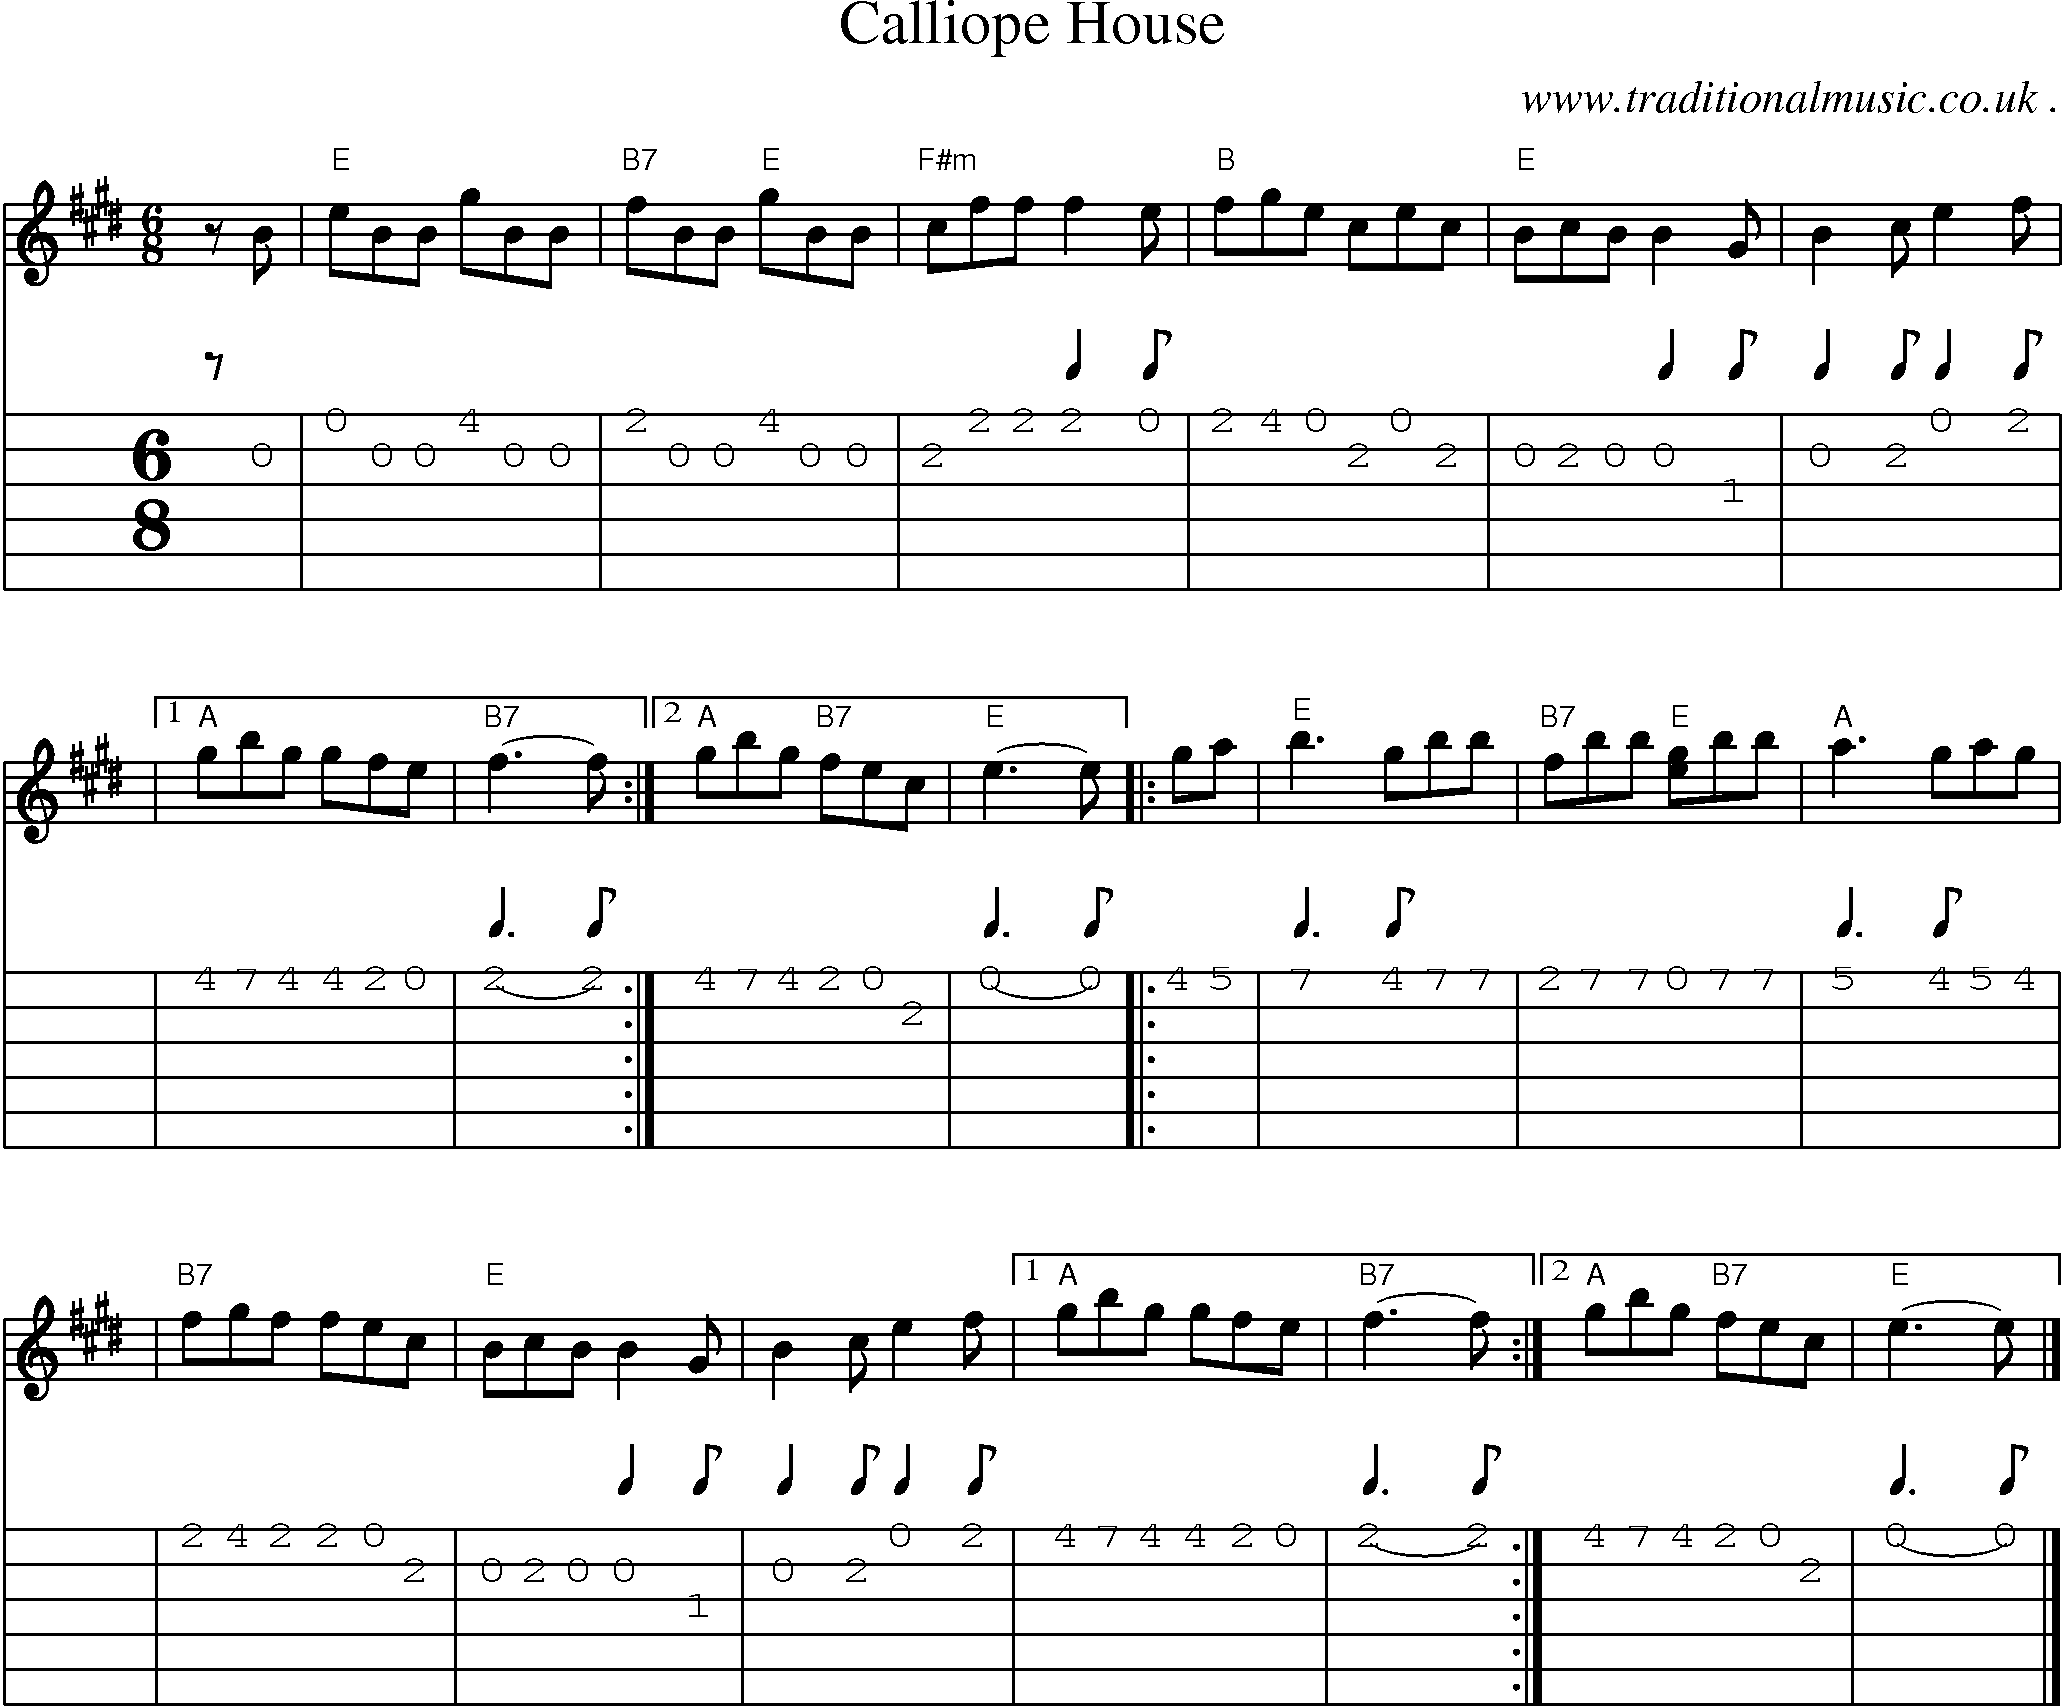 Sheet-music  score, Chords and Guitar Tabs for Calliope House